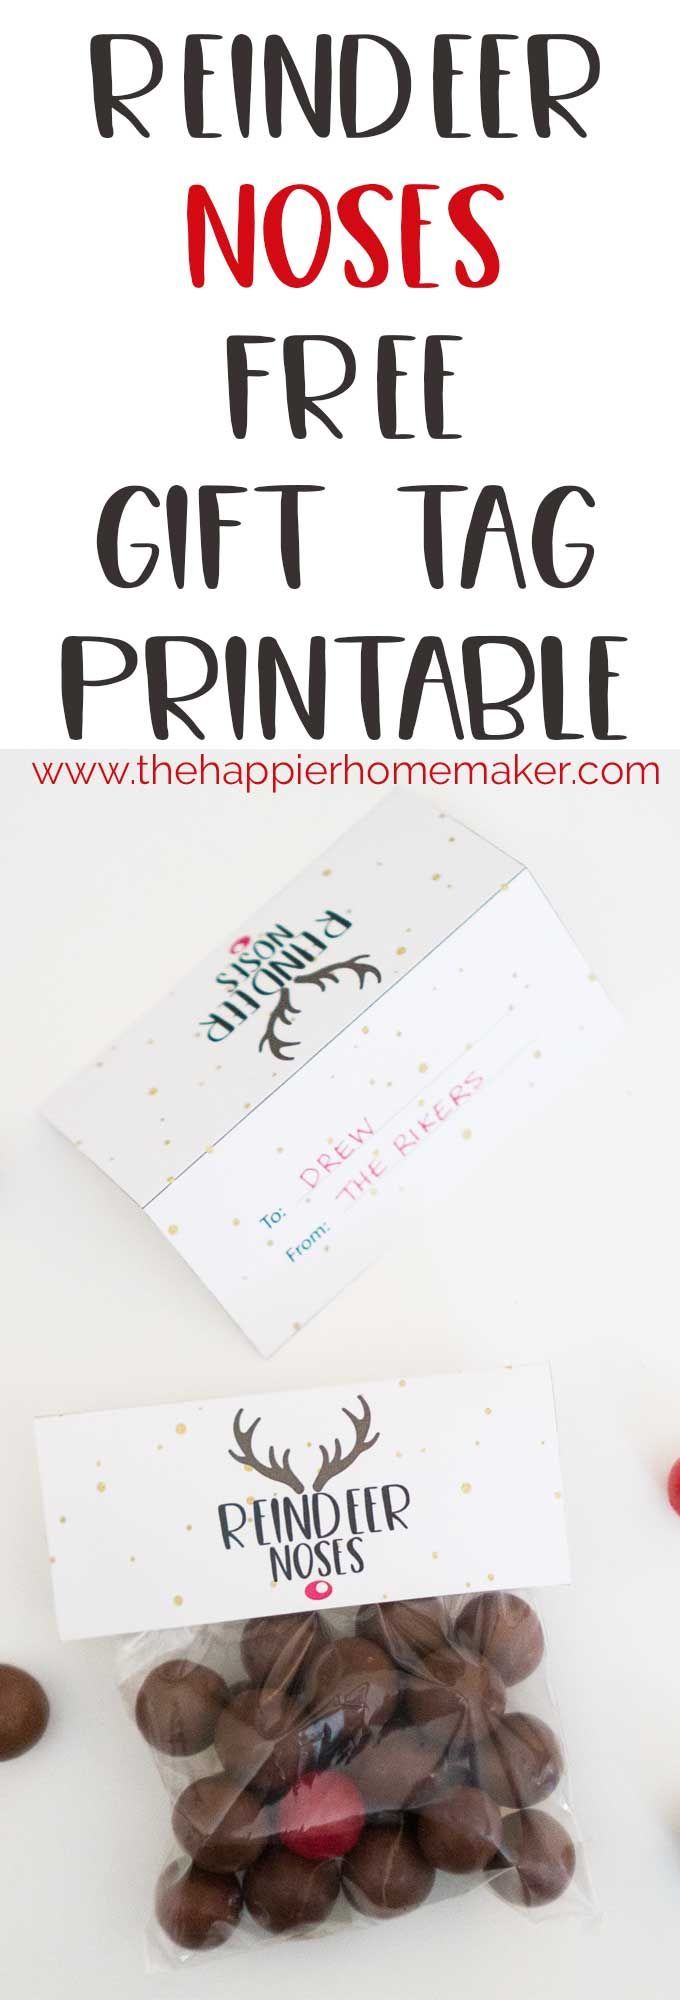 Free reindeer nose printable gift tags are an easy DIY Christmas gift that kids ...